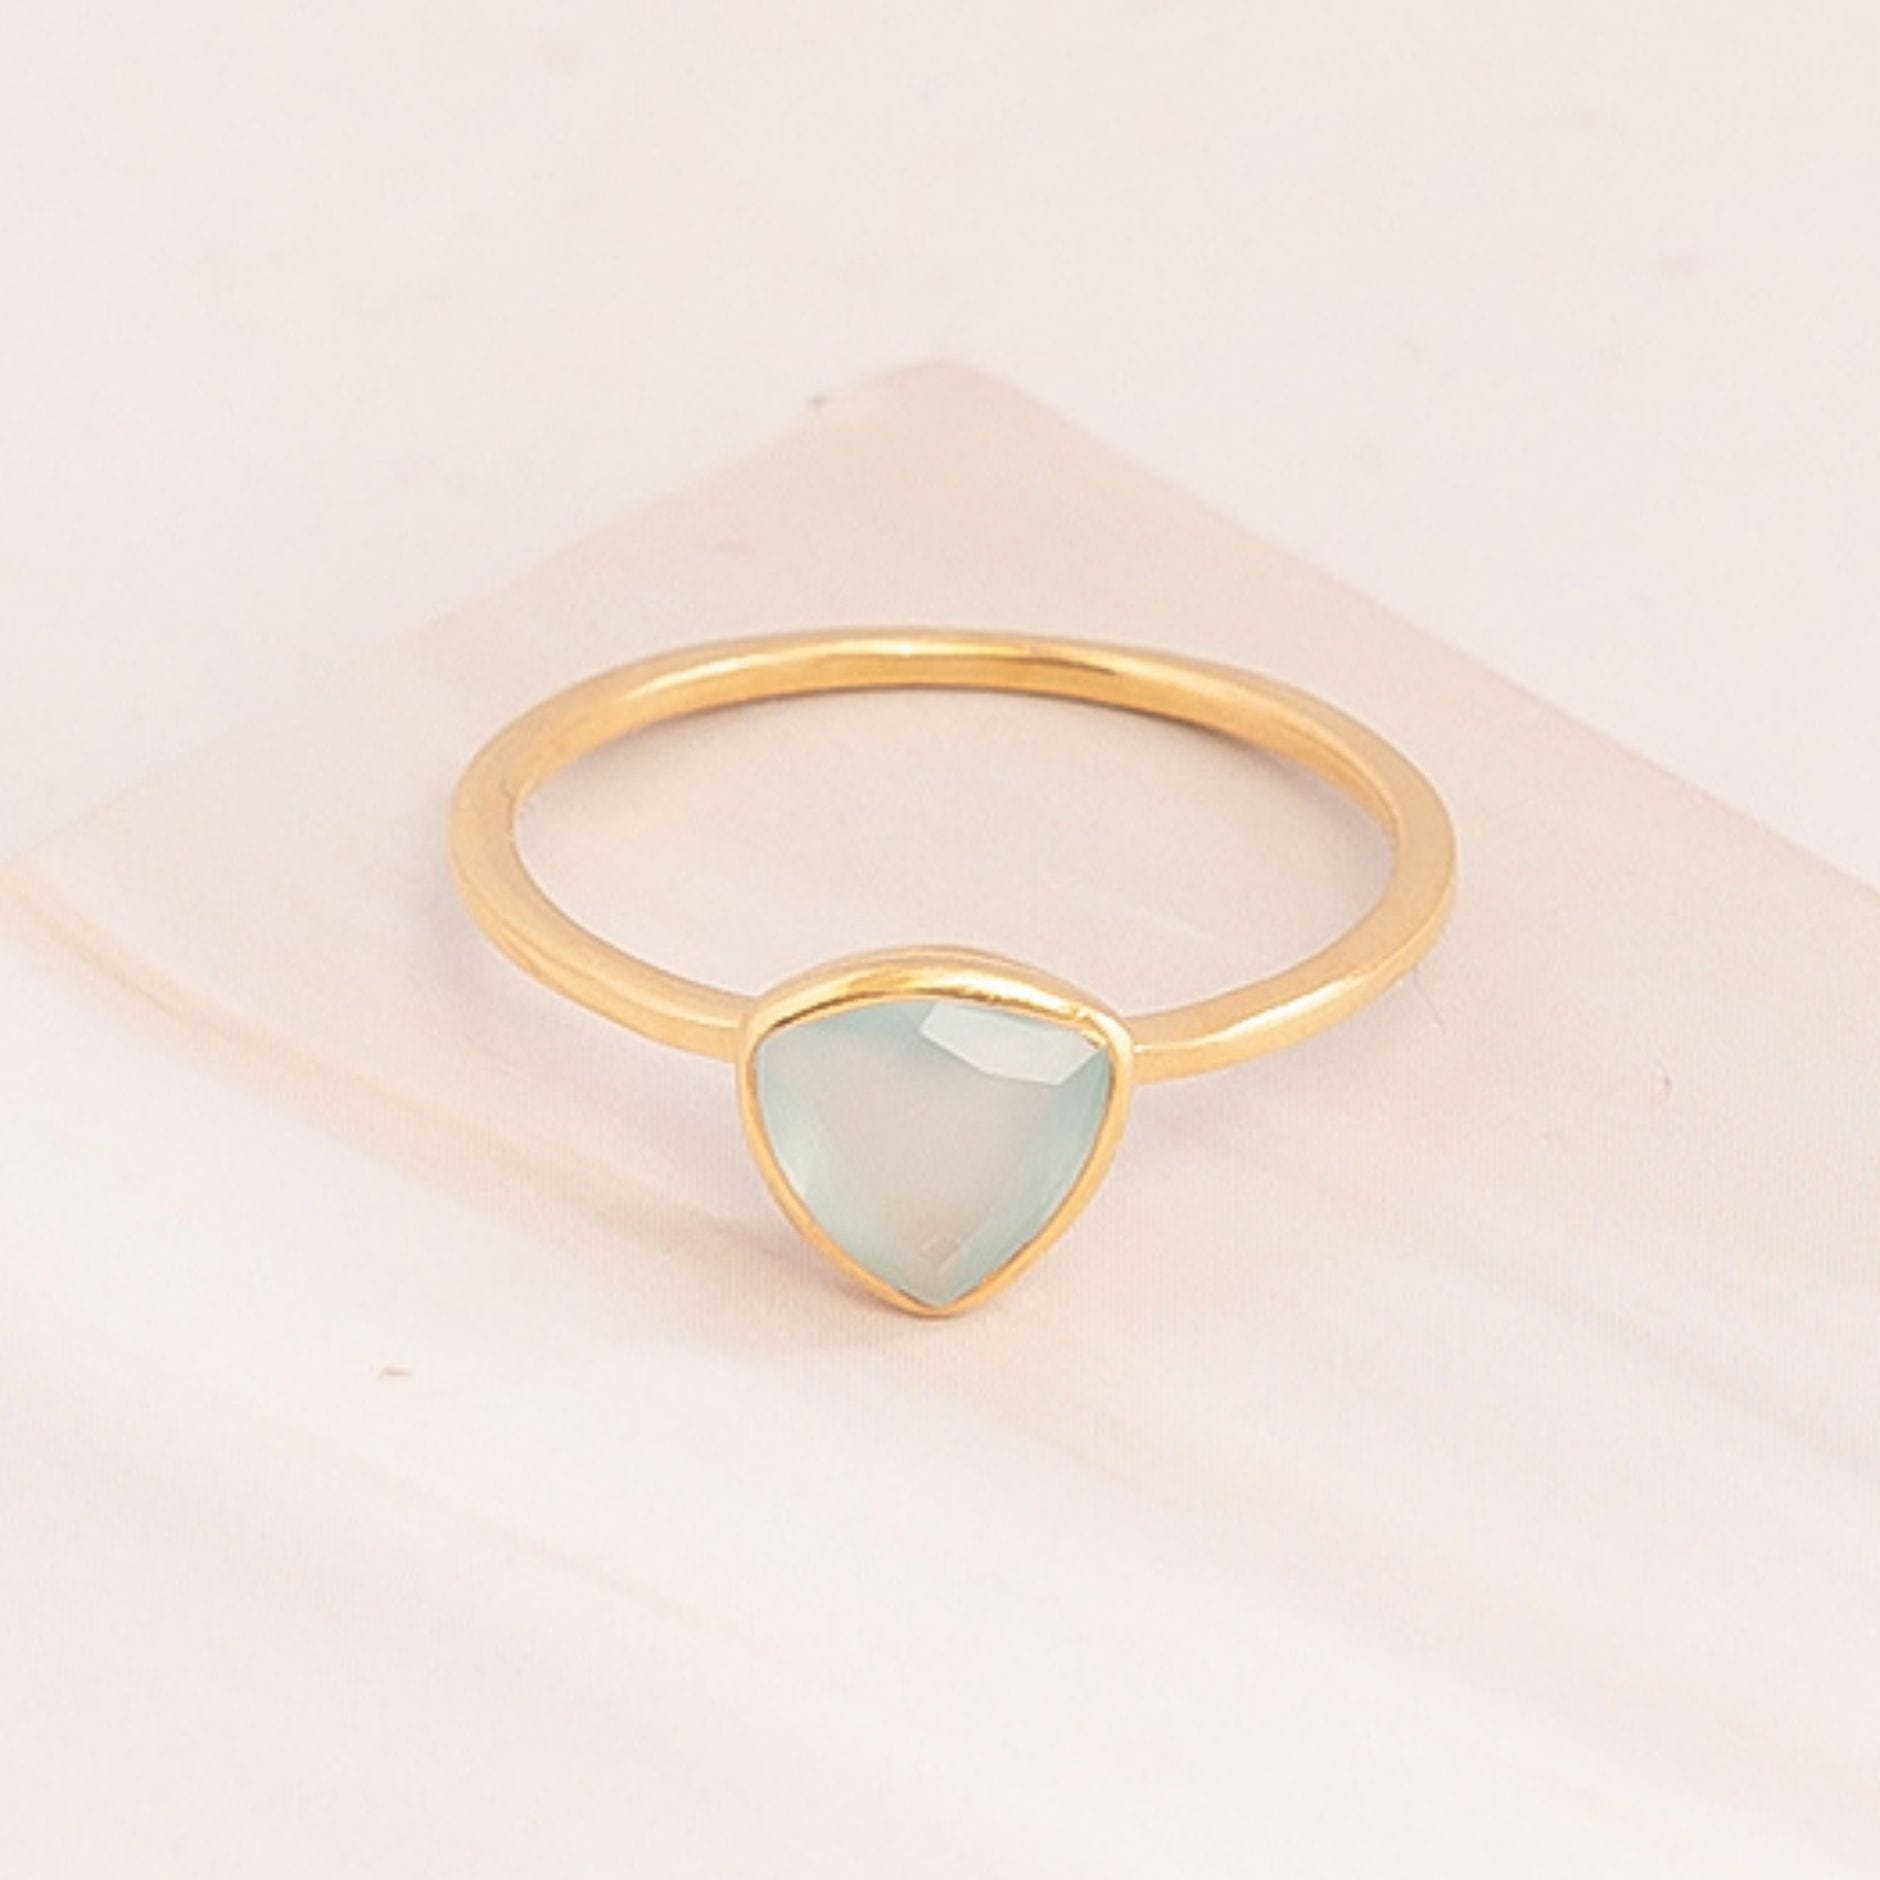 Emblem Jewelry Rings Chalcedony / Triangle Signature Candy Gemstone Stack Rings (Ring Size 6)